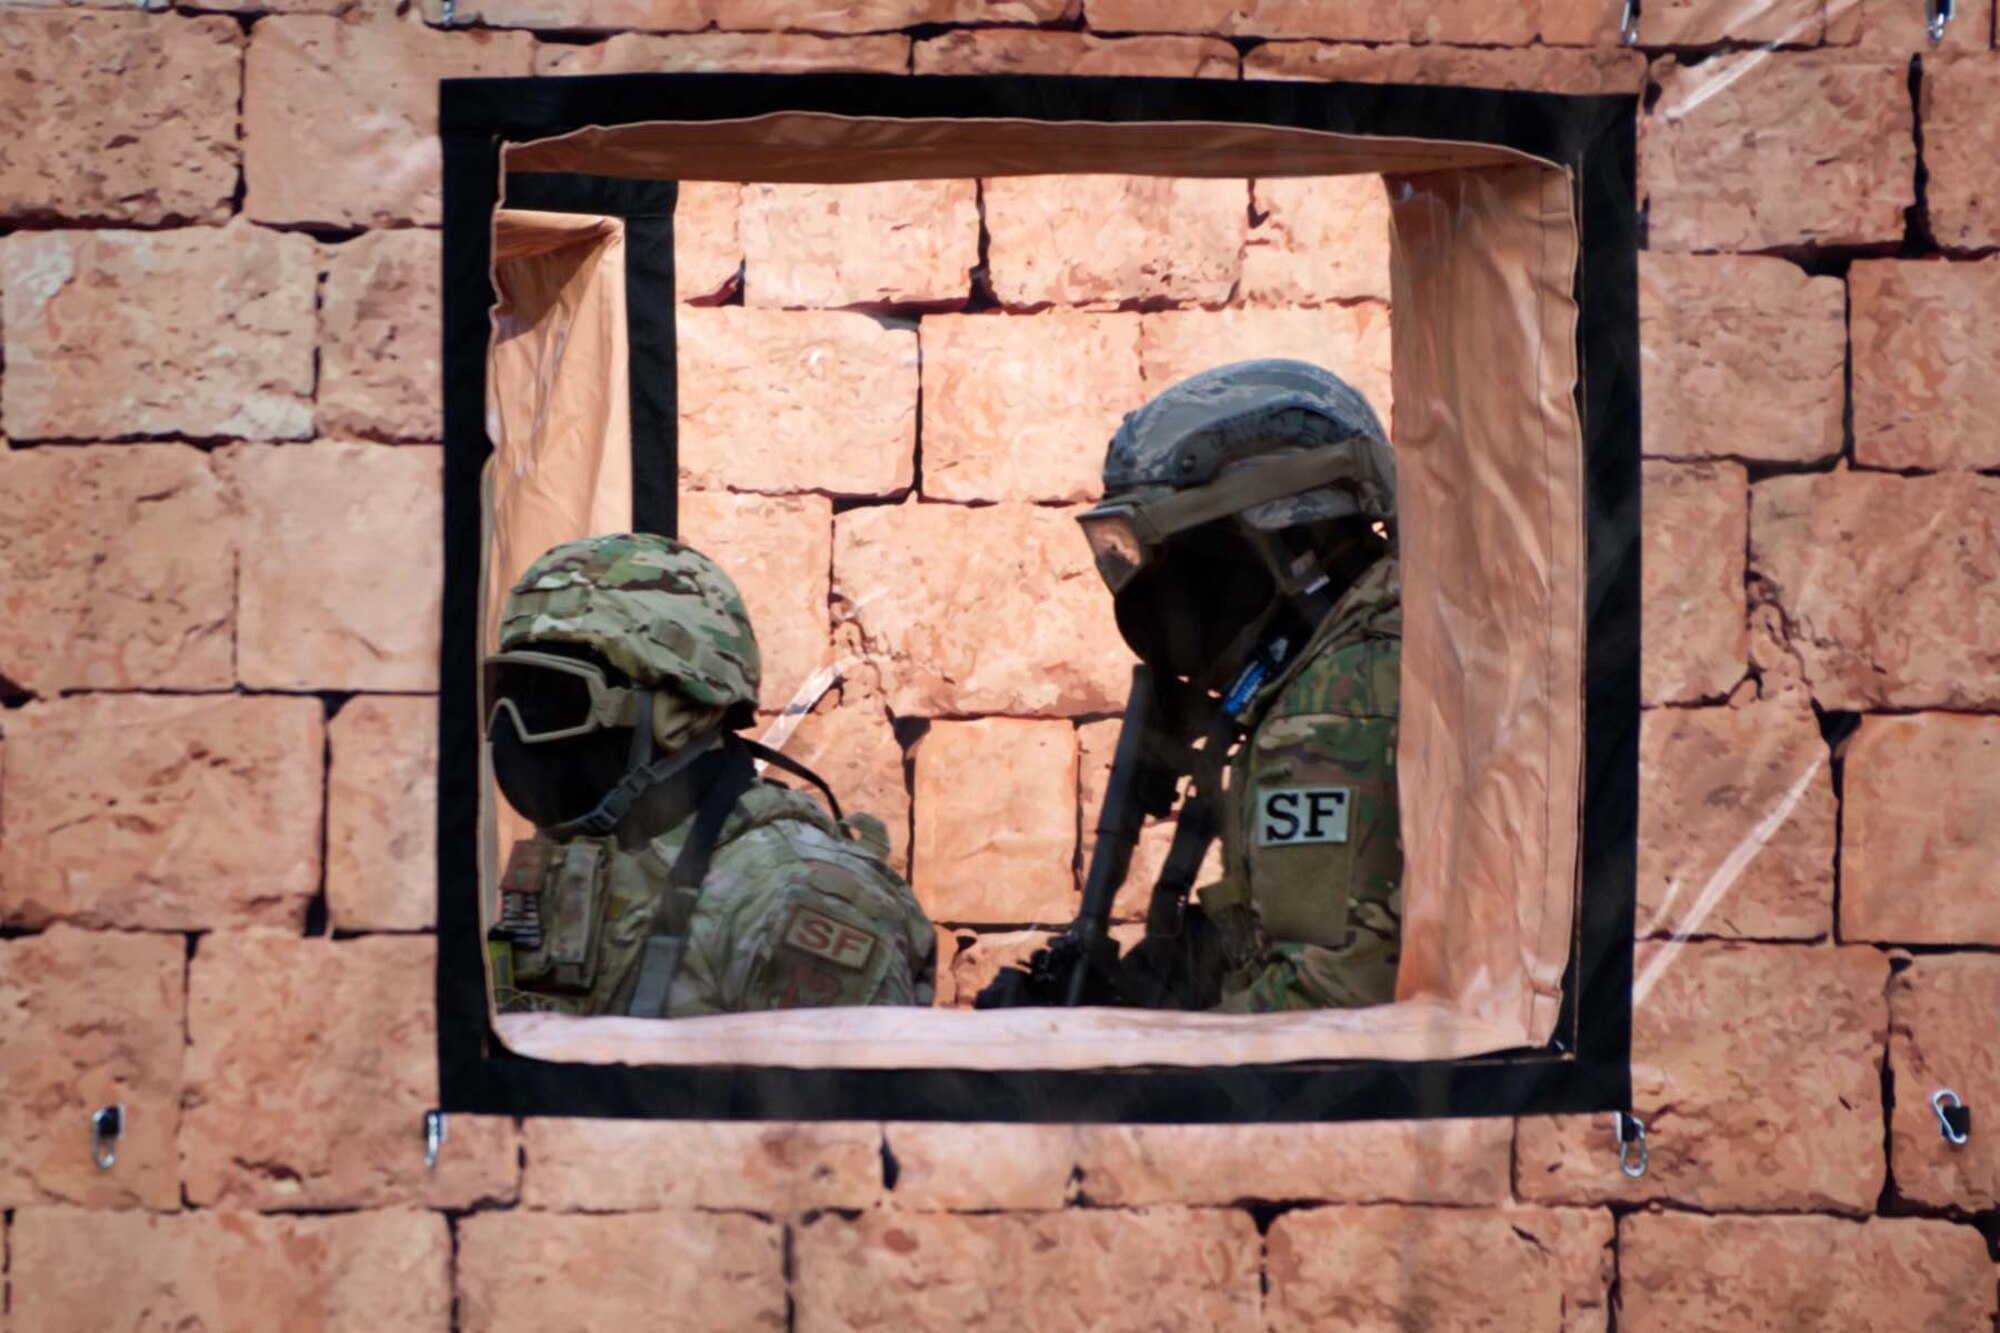 Airmen are framed in the window of an obstacle course.